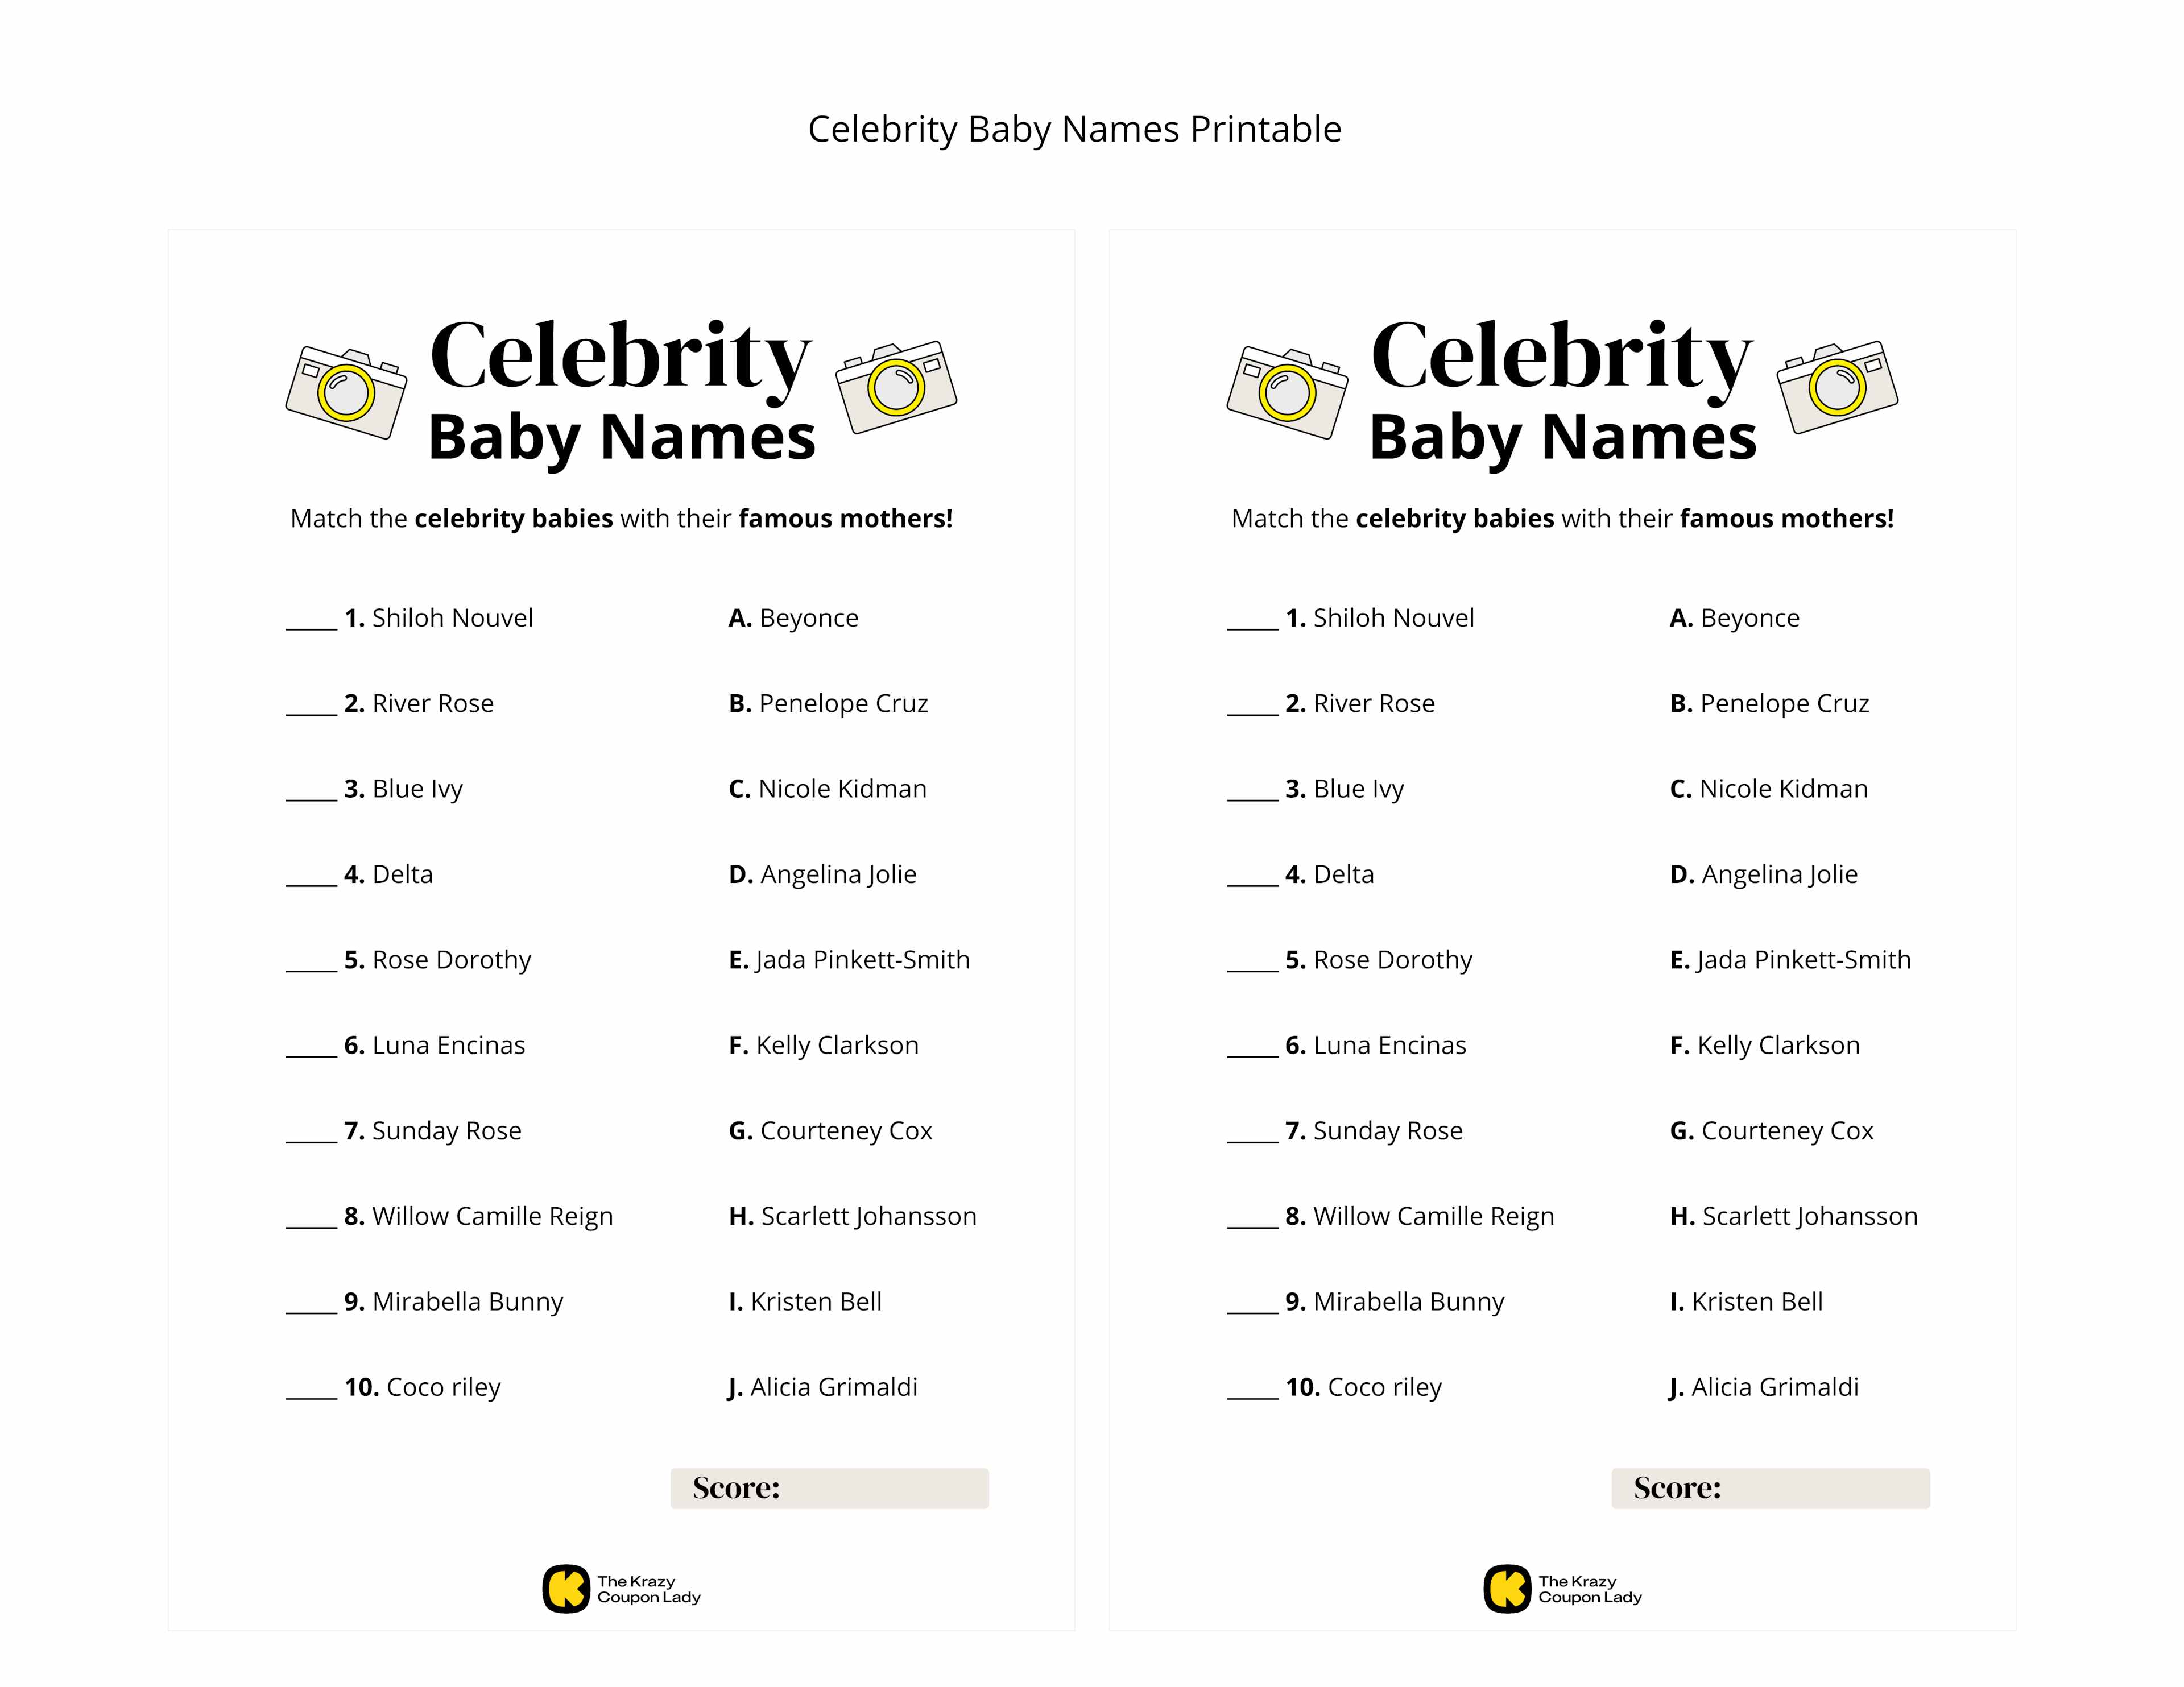 Celebrity Baby Names game for baby showers